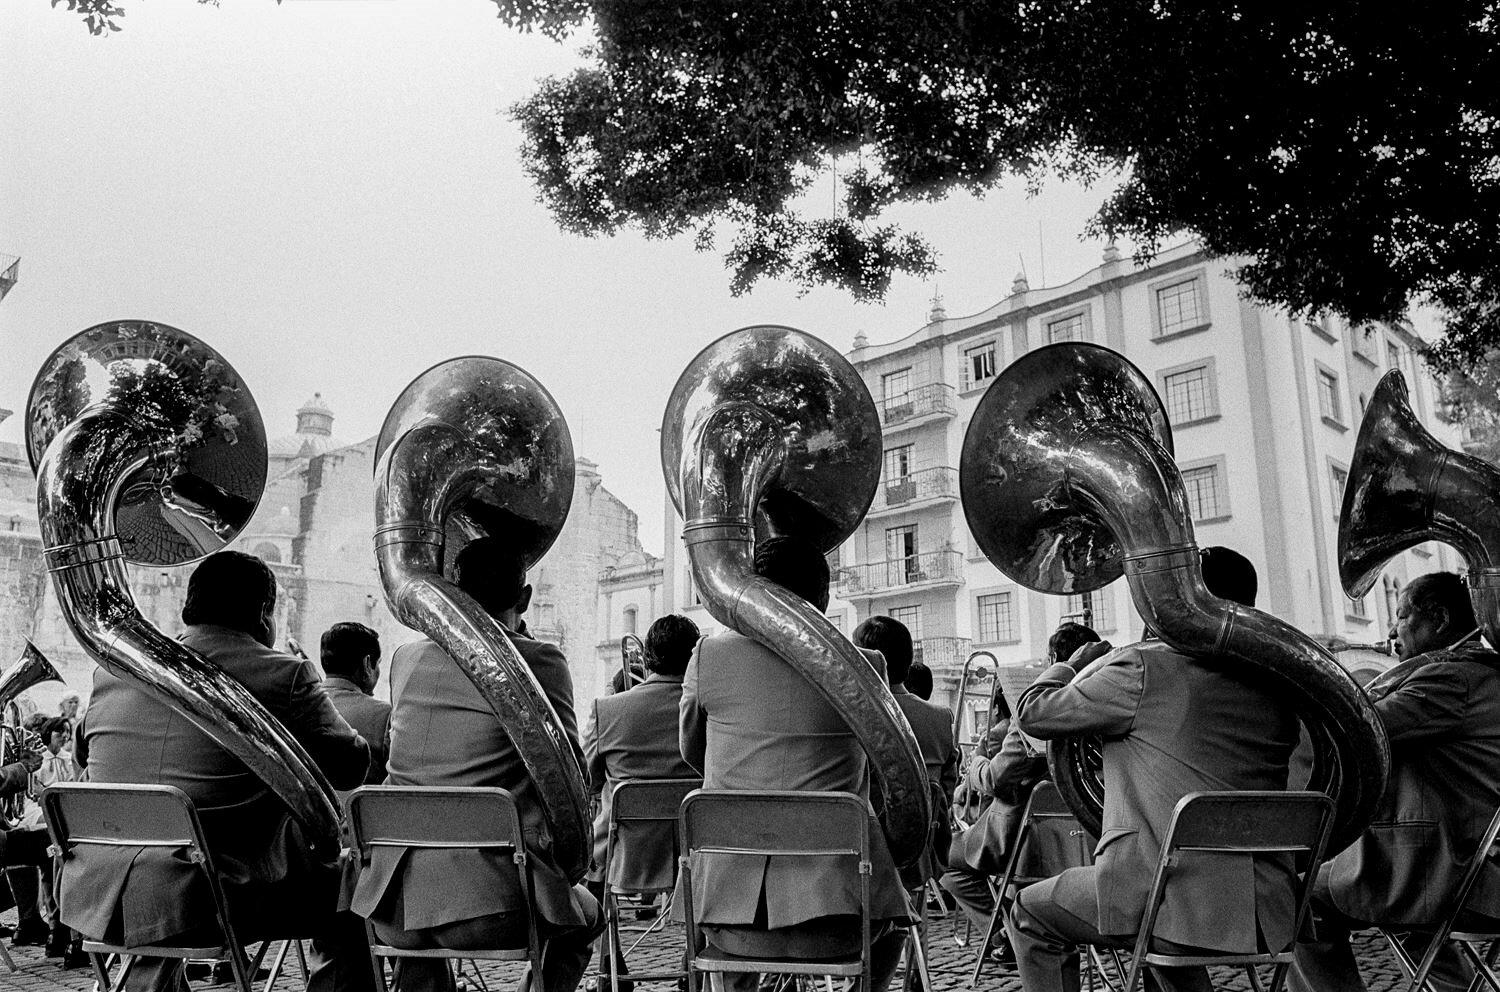 An Honorable Mention was awarded to “The Band, Oaxaca,” a photograph by John Slavin, who received a $150 gift certificate to Jerry’s Artarama of Lawrenceville, N.J.